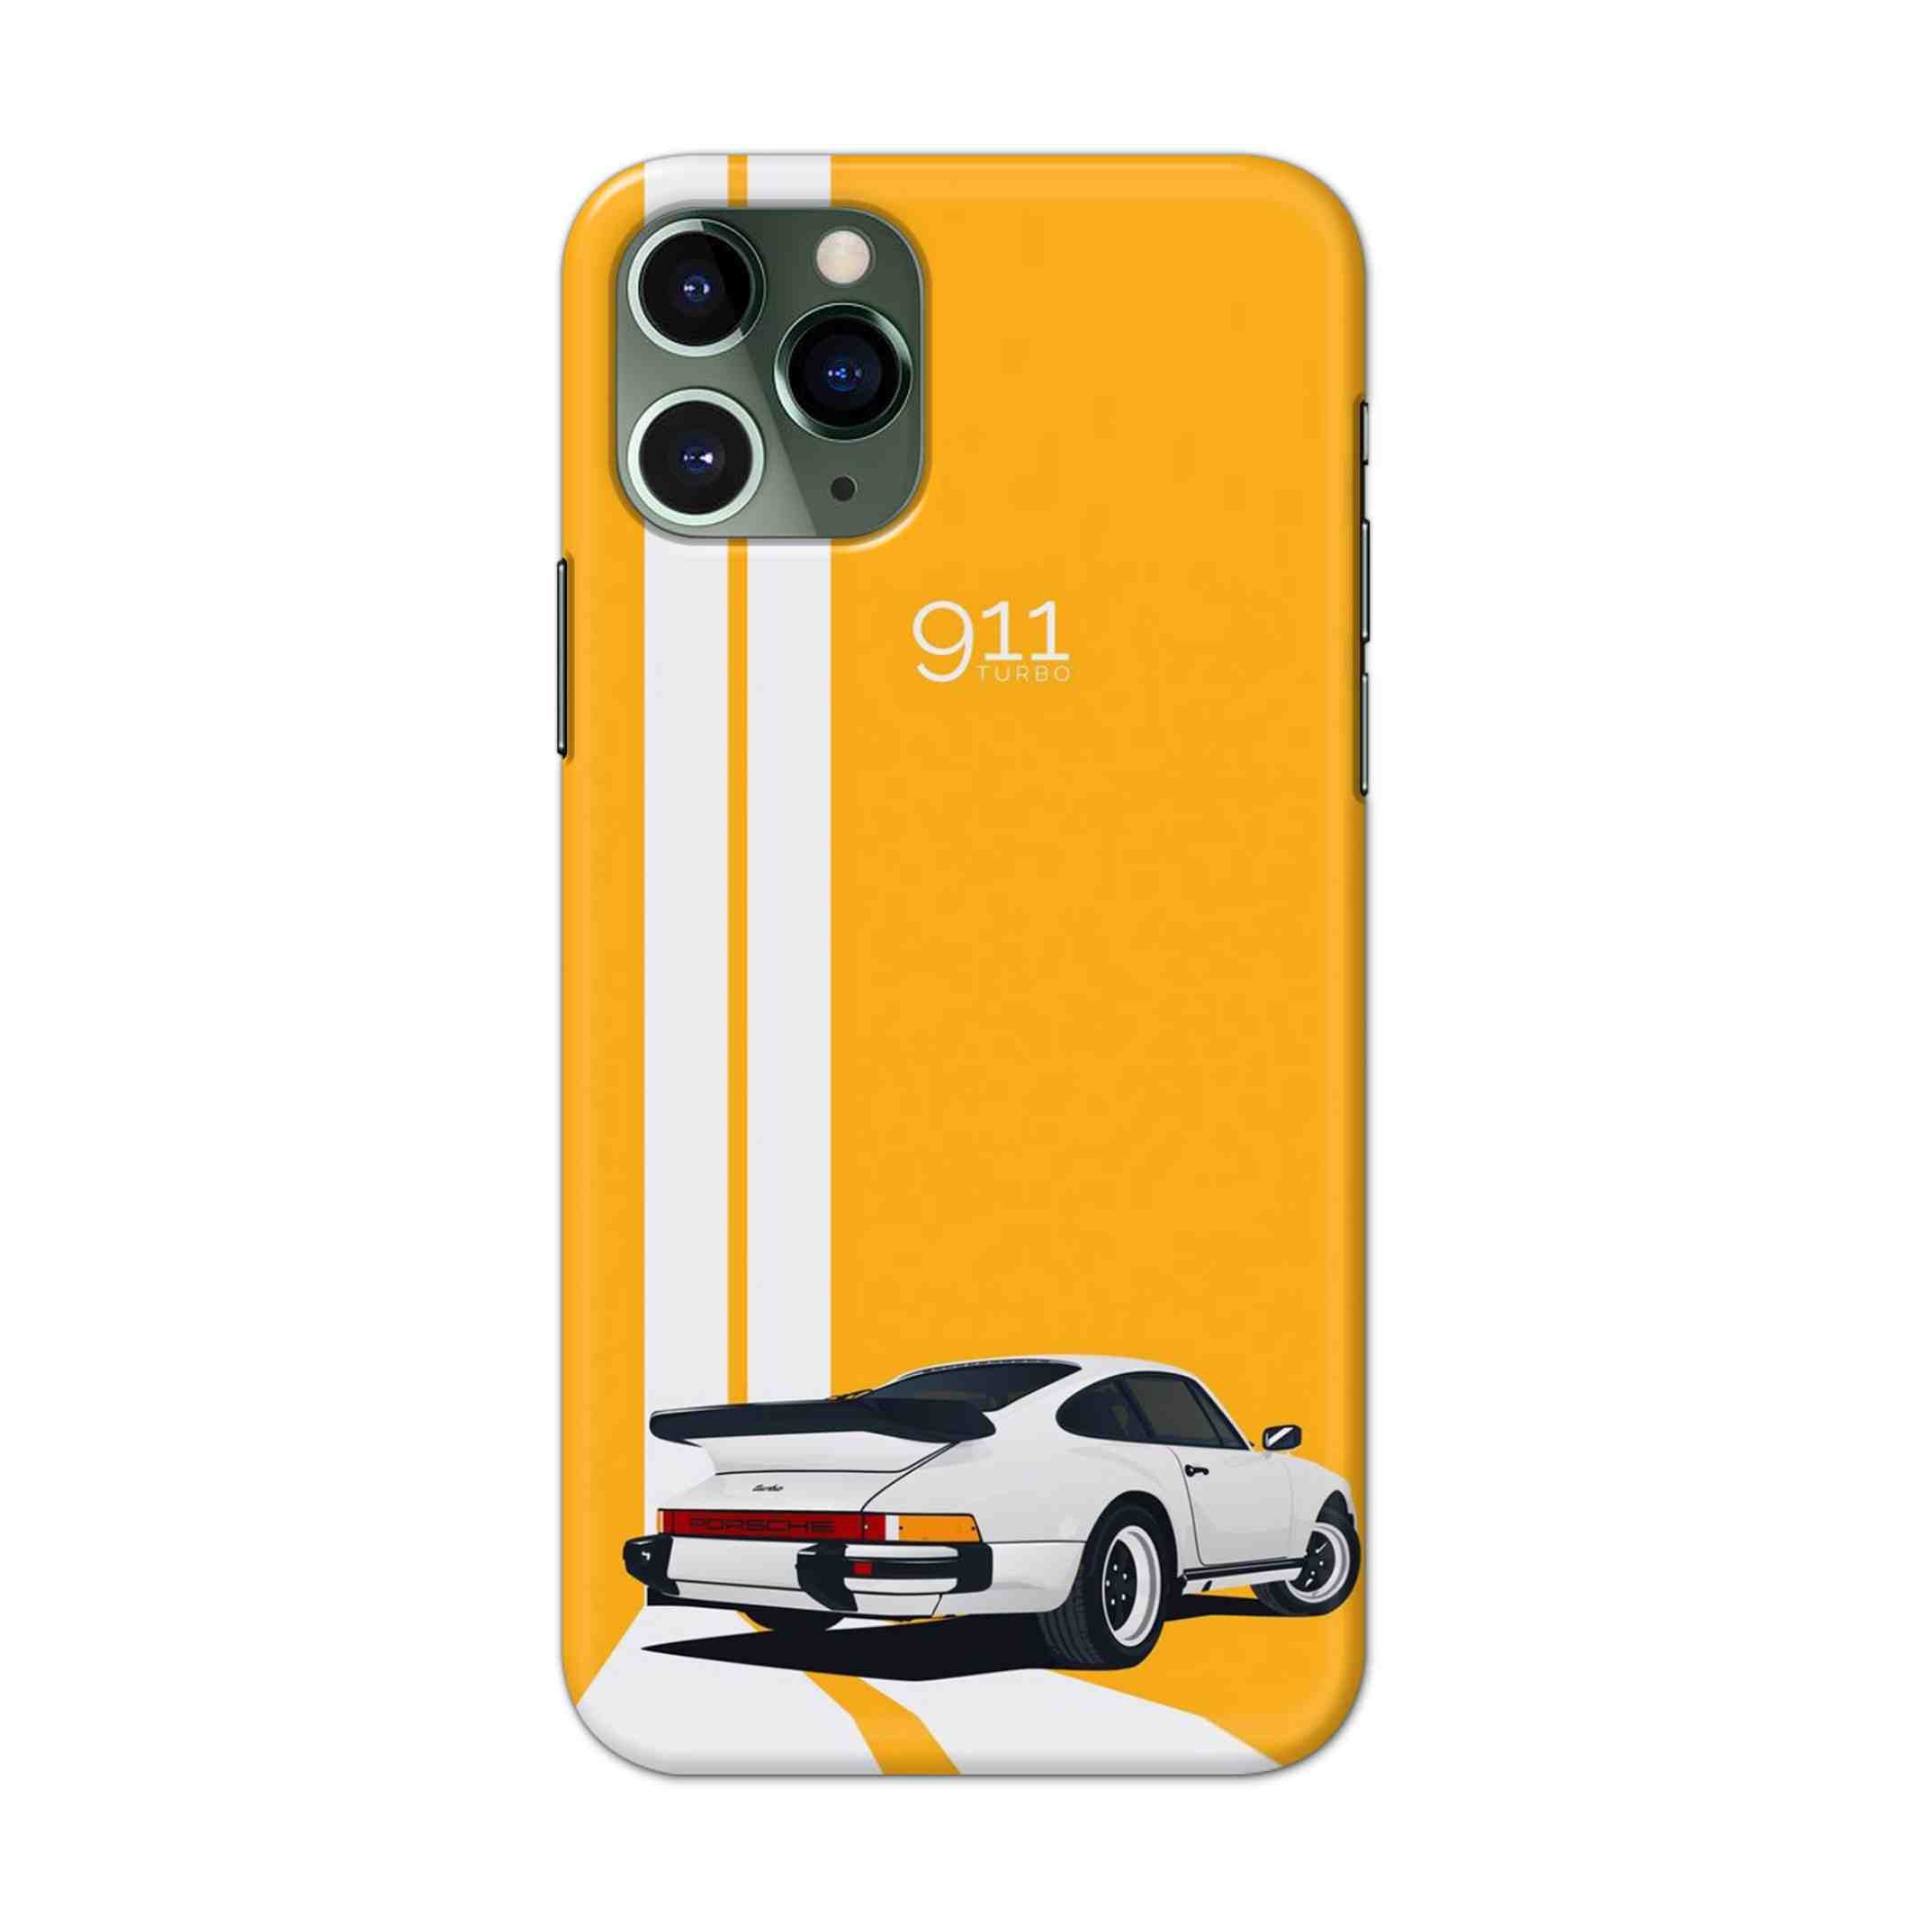 Buy 911 Gt Porche Hard Back Mobile Phone Case/Cover For iPhone 11 Pro Max Online